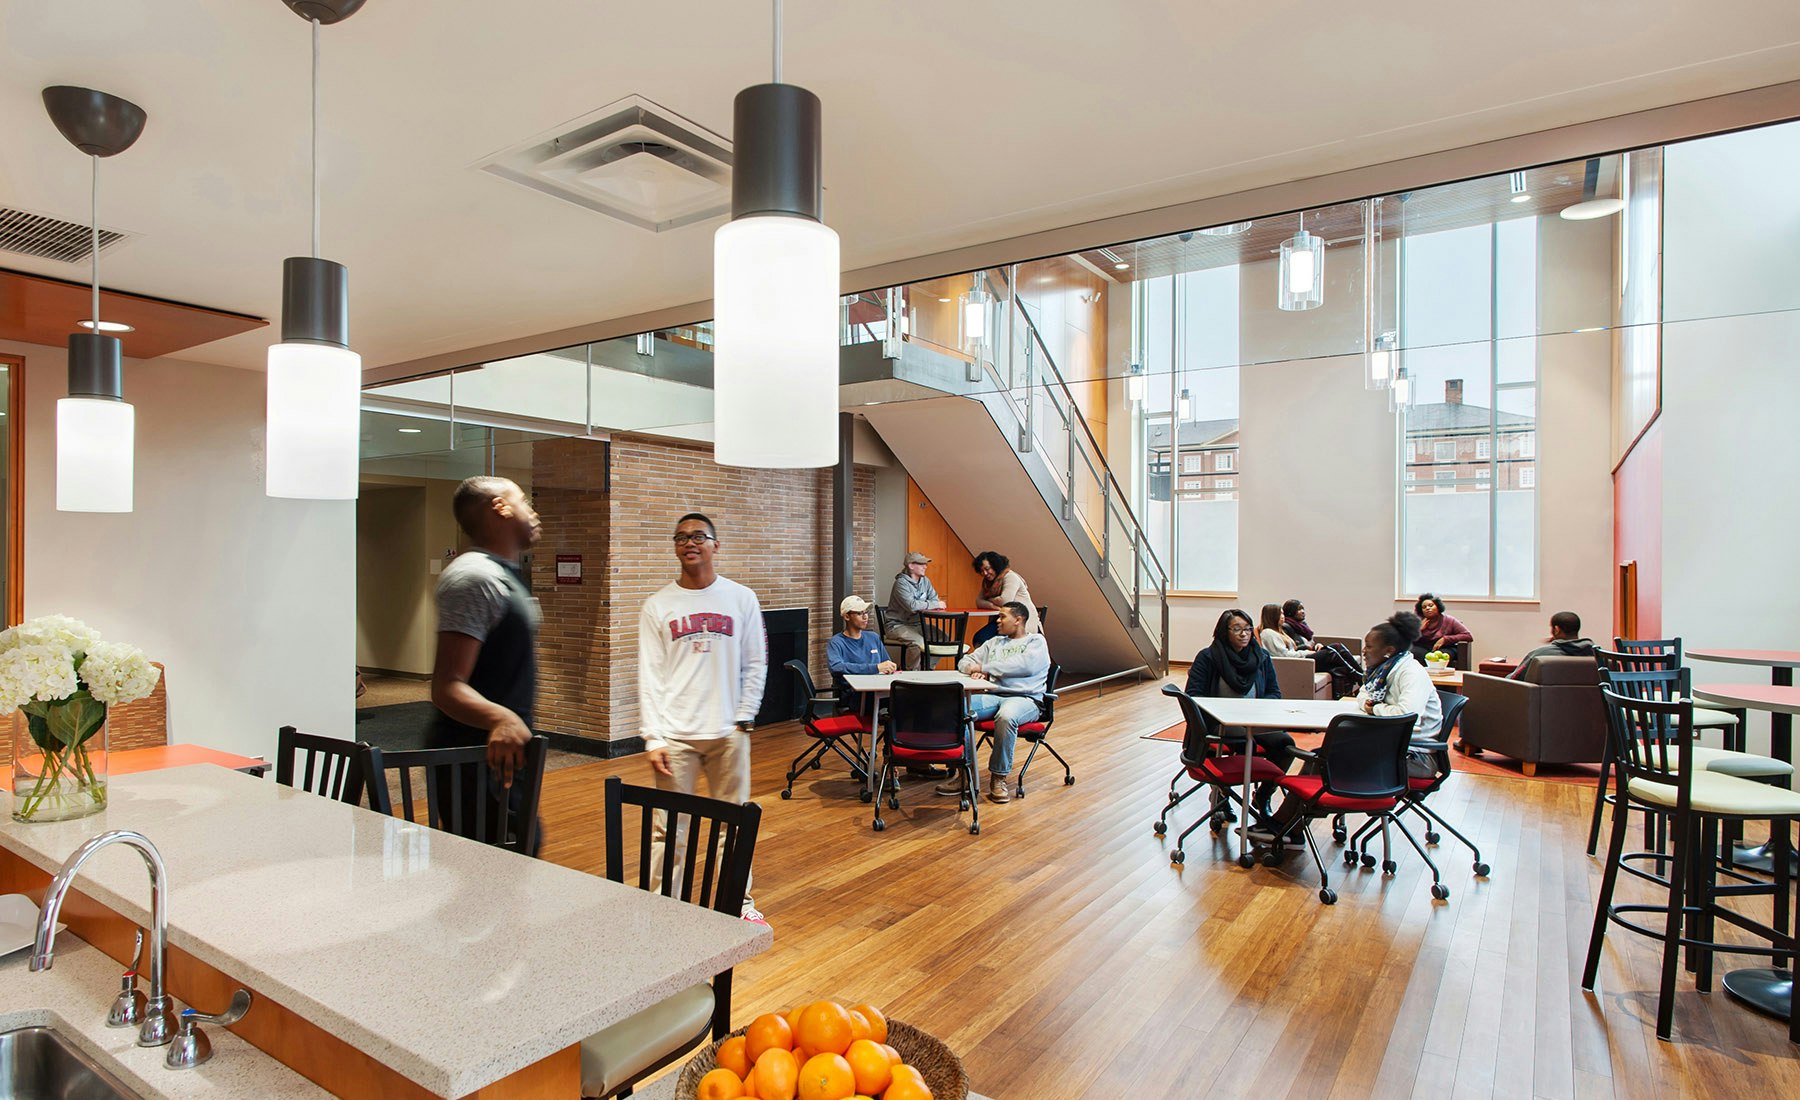 By removing an existing floor, VMDO designed a new two-story lounge space at the north end of each building. The new commons creates a remarkably open gathering space that is at once open and light-filled as well as private and removed.